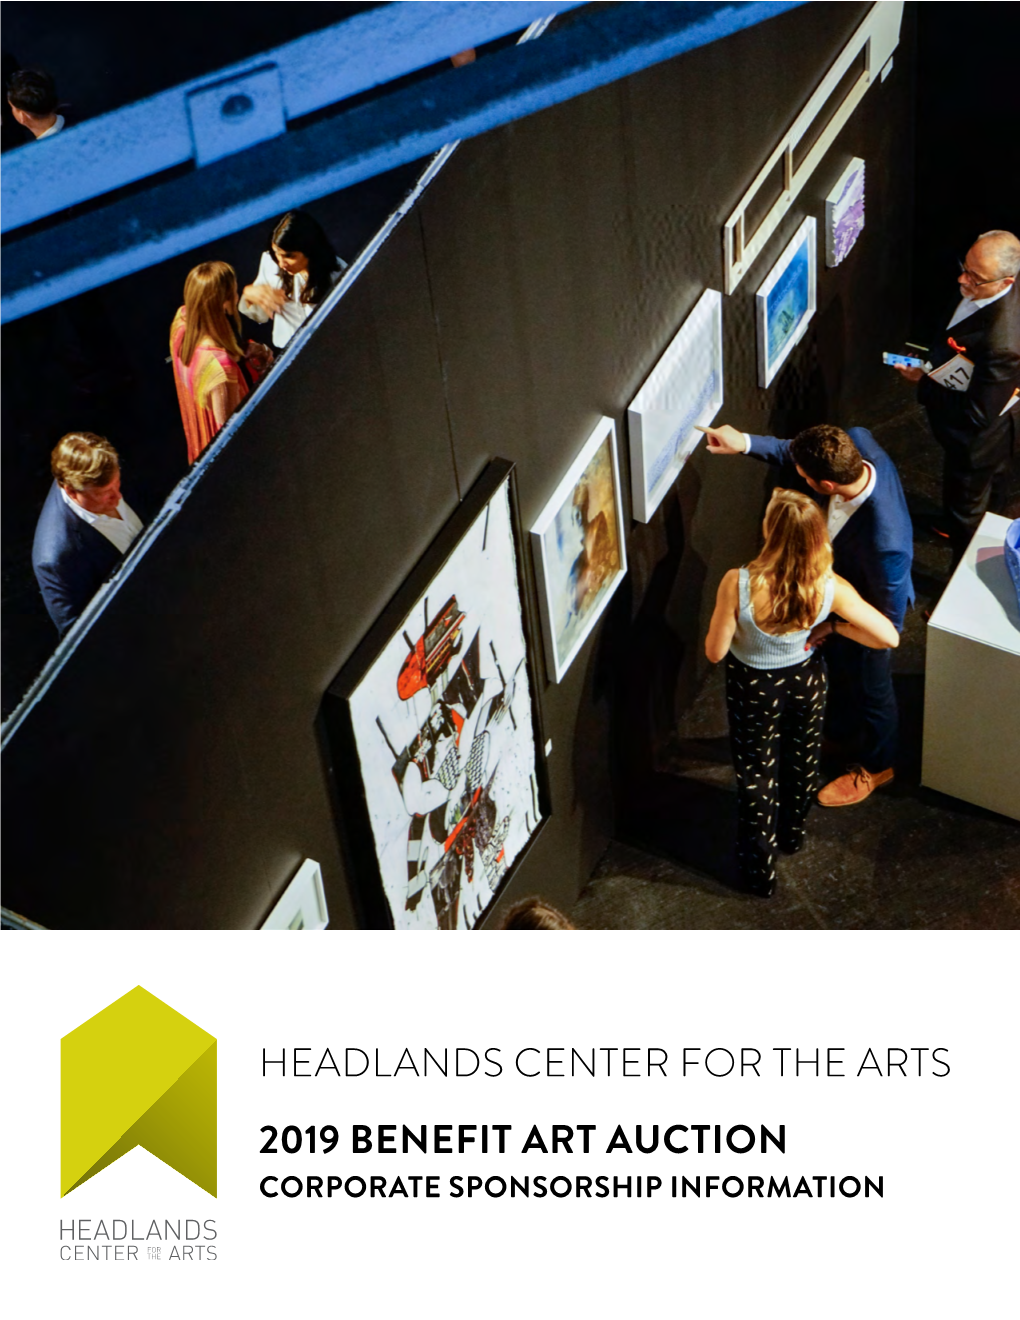 Headlands Center for the Arts 2019 Benefit Art Auction Corporate Sponsorship INFORMATION Photo by Tom Ide